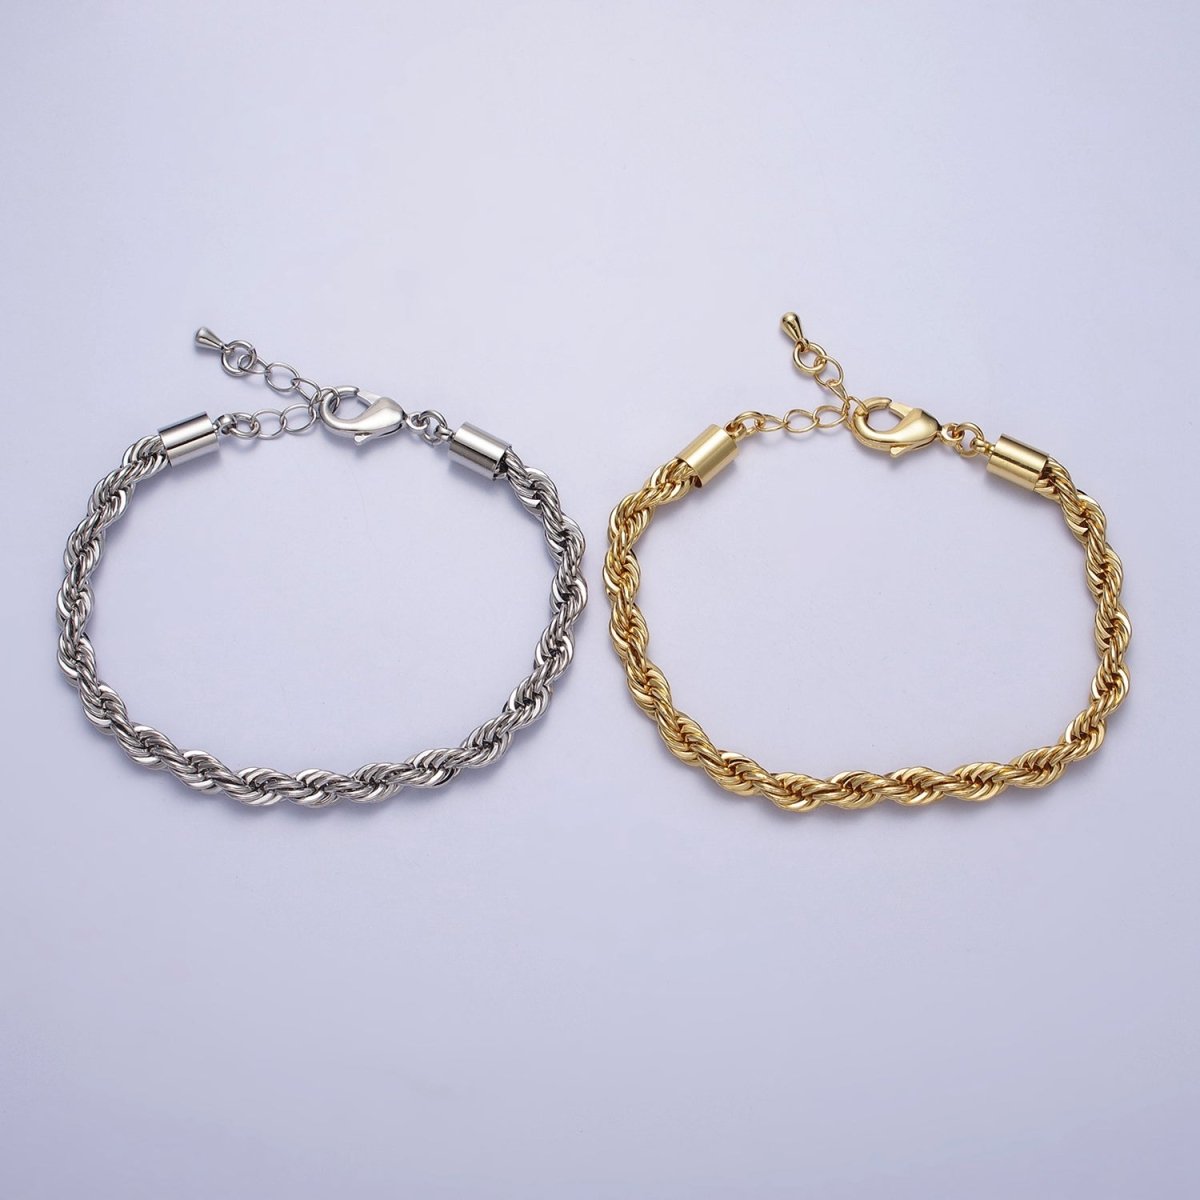 Bold Gold Twisted Rope Chain Bracelet Silver Chunky Rope Chain bracelet 5mm thickness | WA-1540 WA-1541 Clearance Pricing - DLUXCA